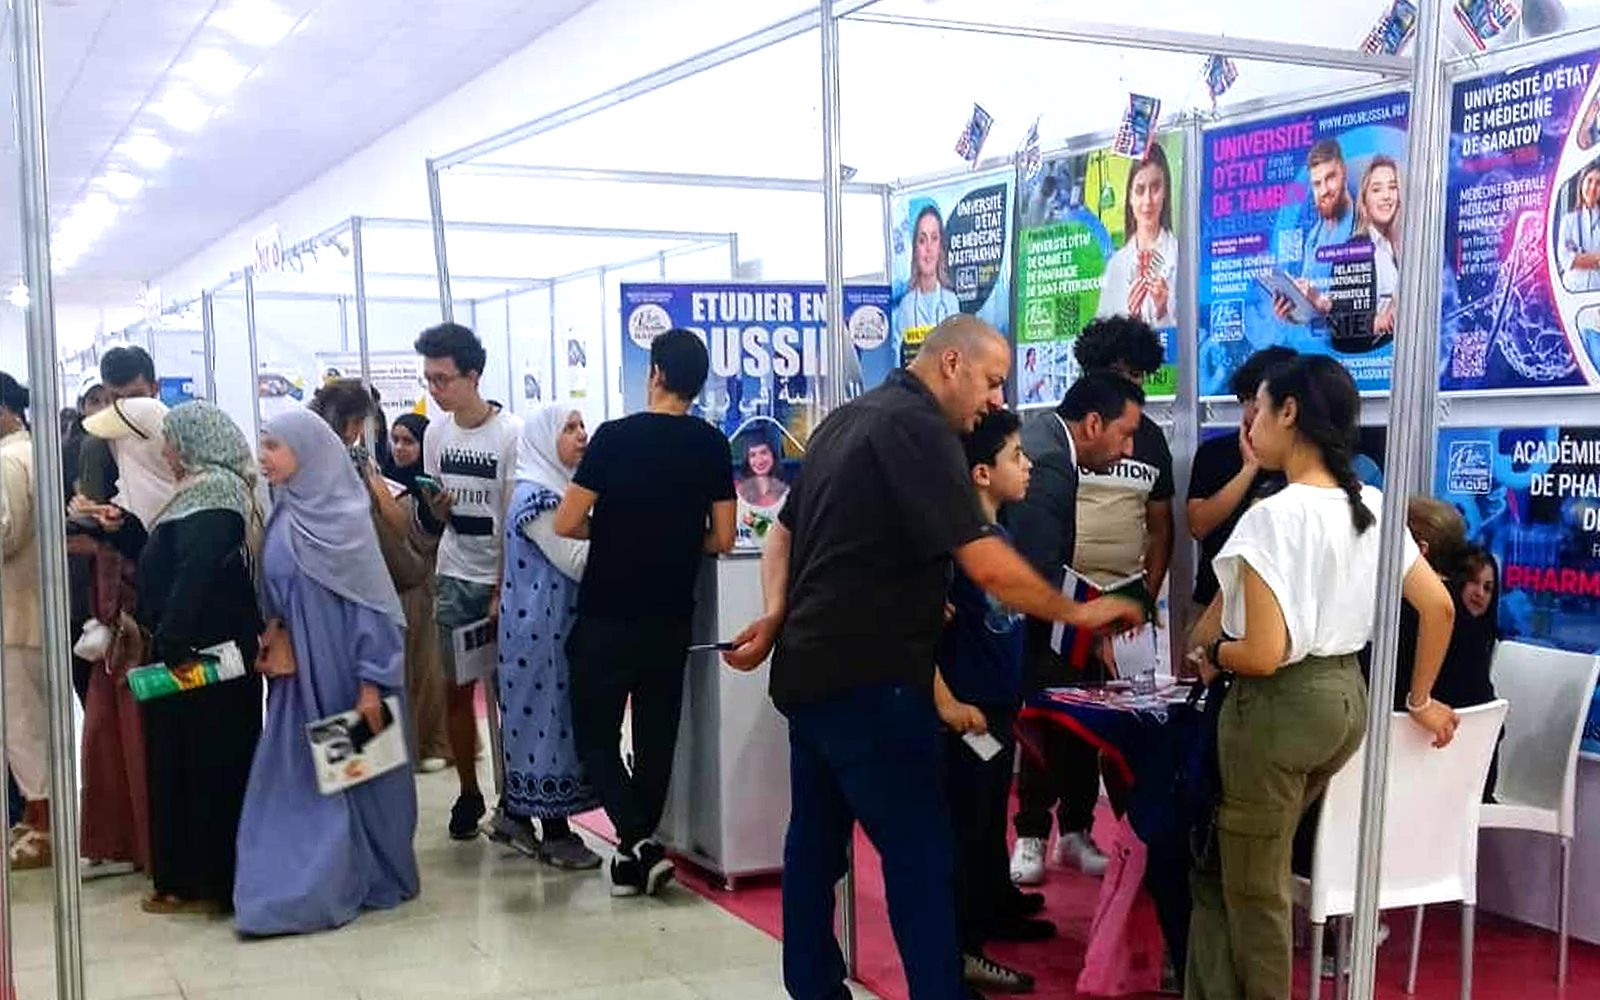 During the exhibition, all the visitors of RACUS - Study in Russia stand received colorful booklets and designer gifts from the Organisation. Thanks to the responsible team of organizers of the event and to the visitors of the exhibition for their curiosity, thirst for knowledge and interest in studying in Russia.